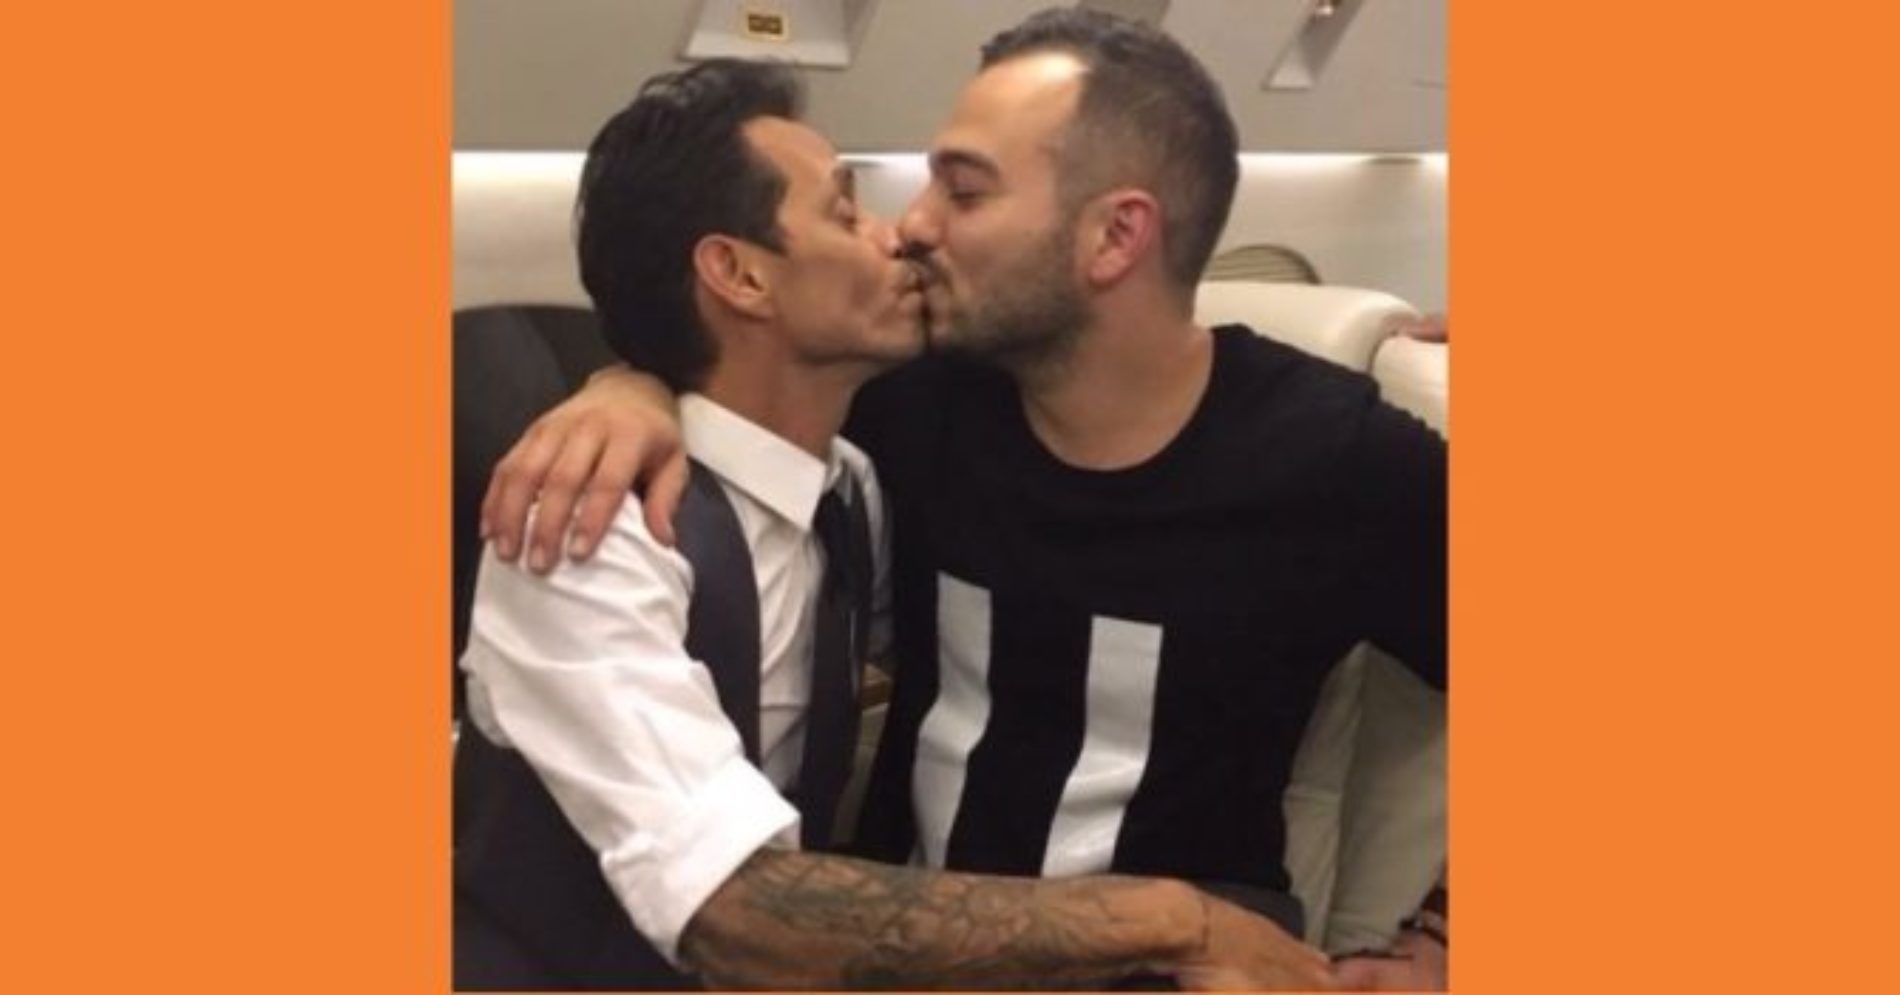 Marc Anthony Is Kissing Everybody, And That’s Okay. But His Wife’s Not Having It